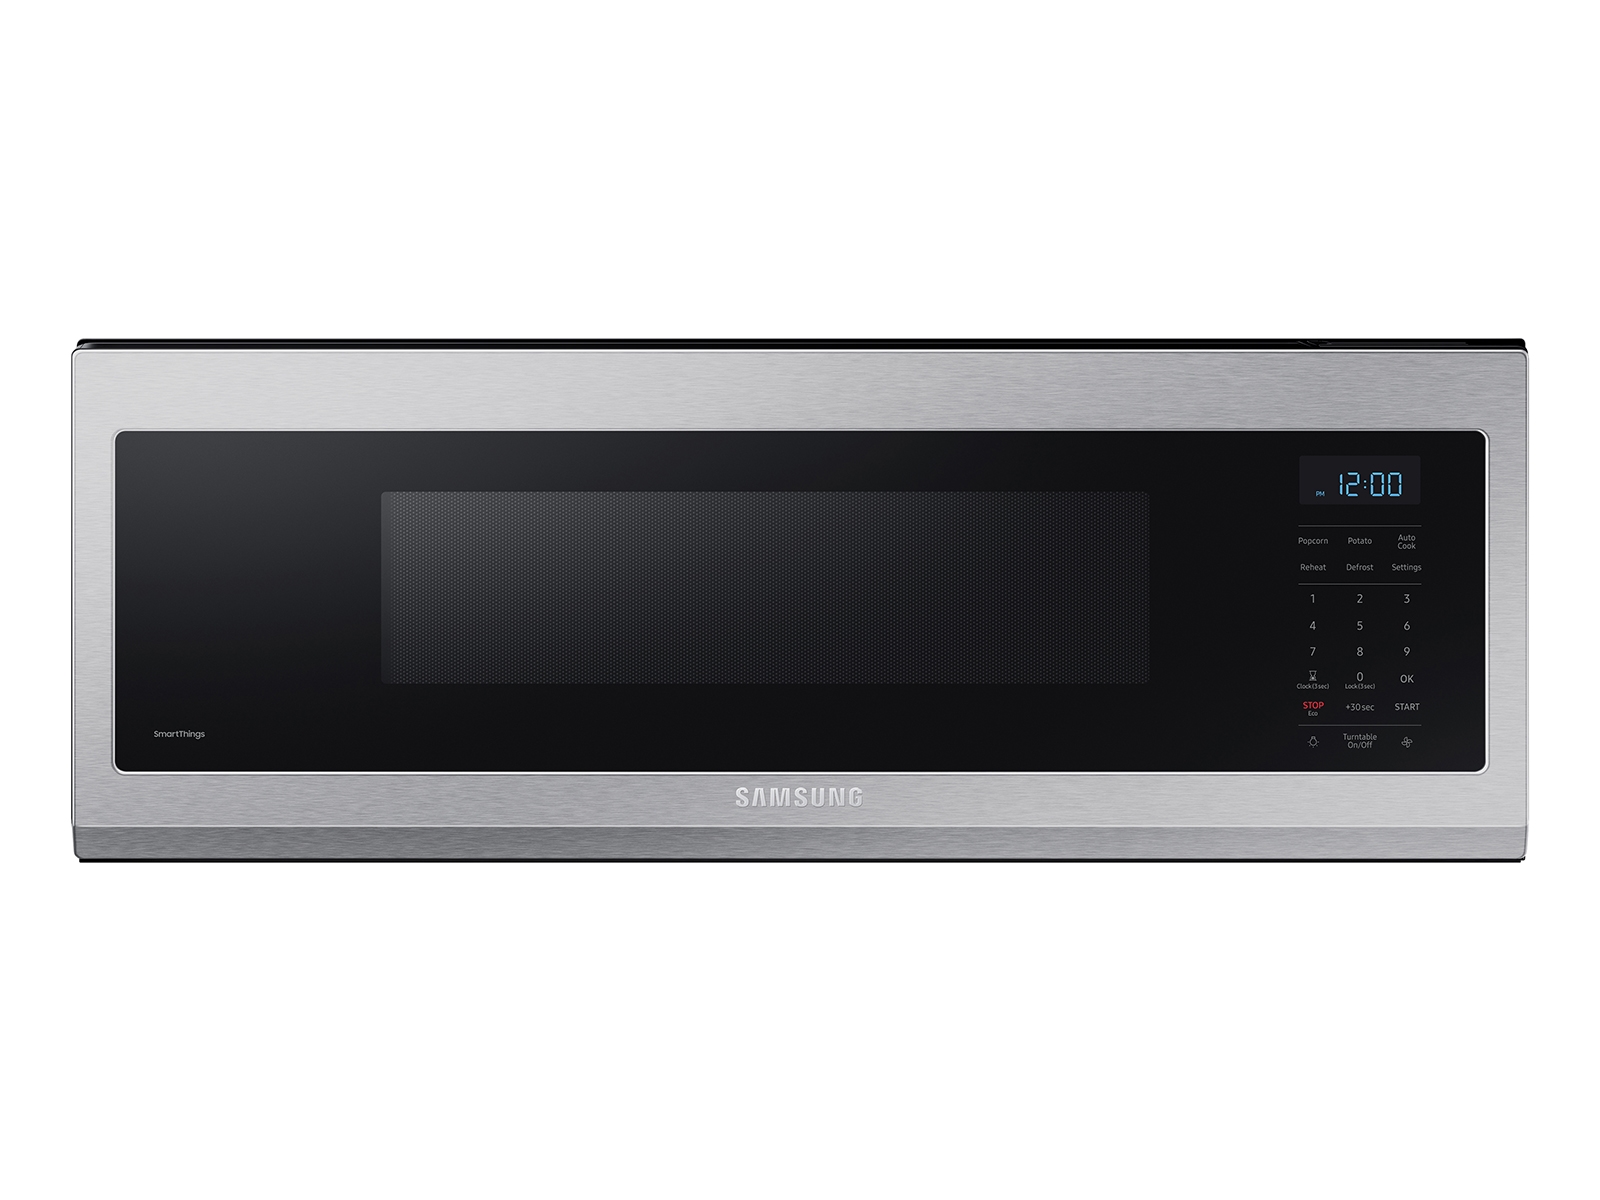 Samsung 1.1 cu. ft. Smart SLIM Over-the-Range Microwave with 400 CFM Hood Ventilation, Wi-Fi & Voice Control in Stainless Steel(ME11A7510DS/AA)